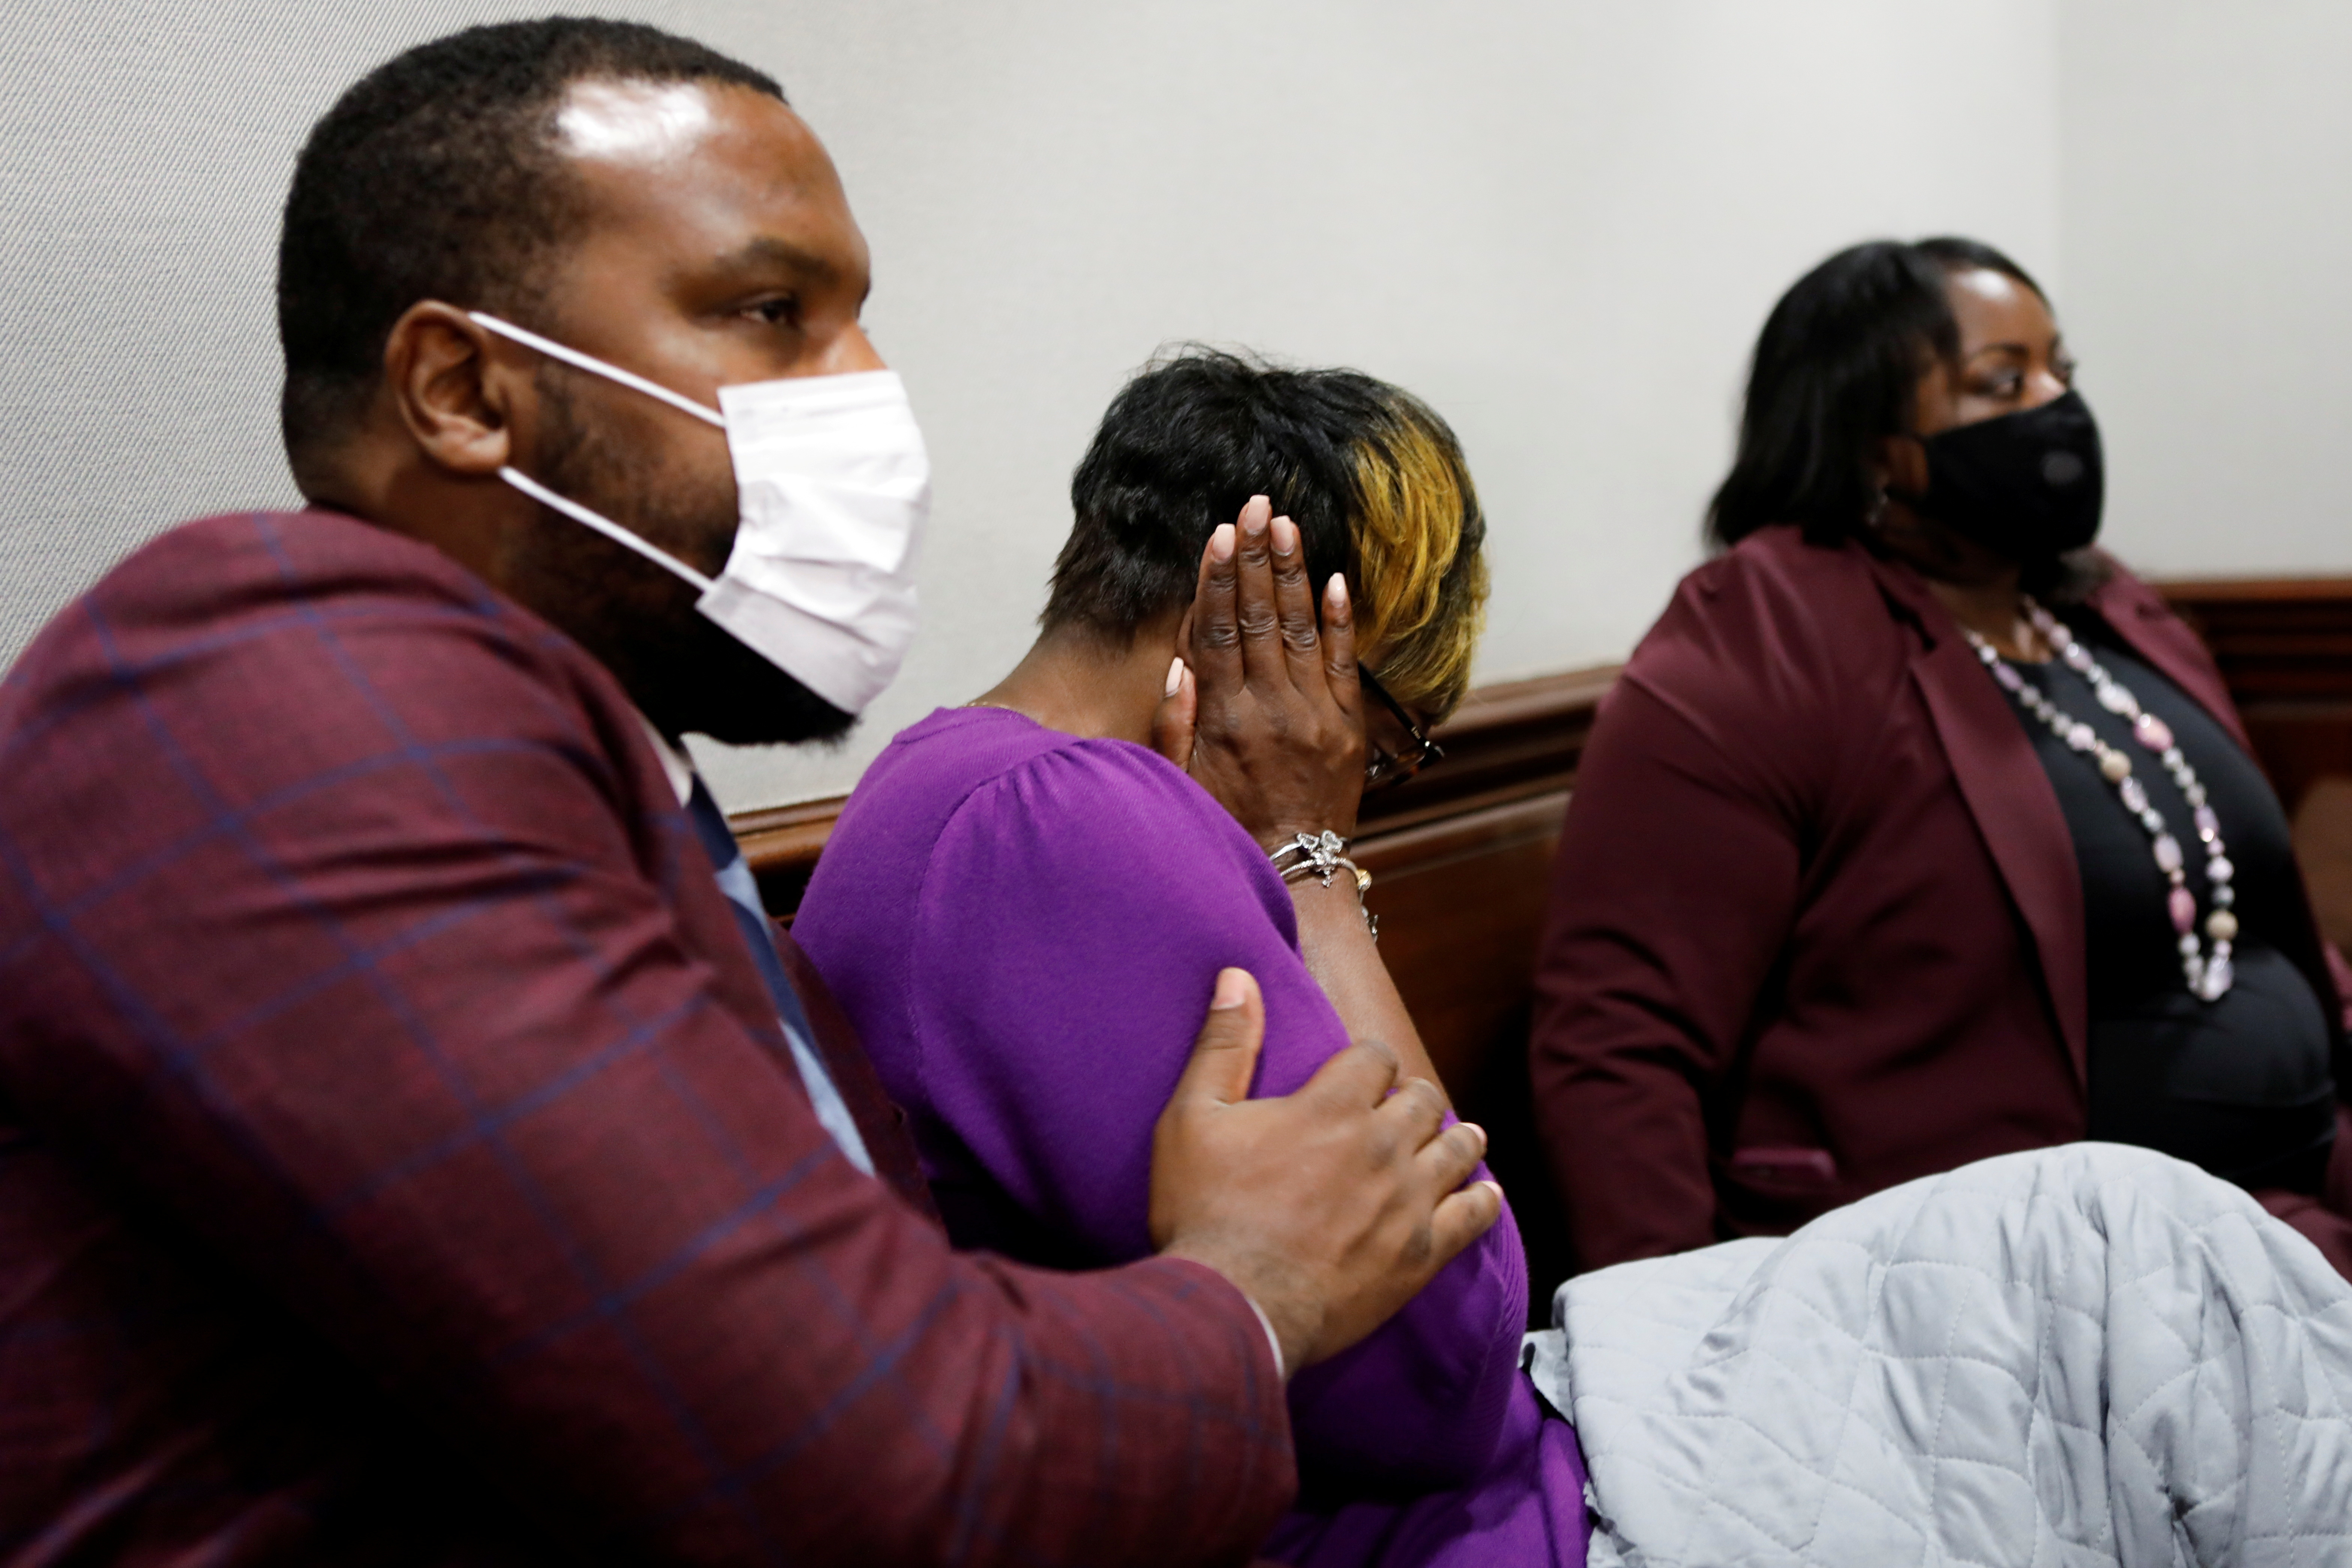 Attorney Lee Merritt consoles Wanda Cooper-Jones, mother of Ahmaud Arbery, as she reacts while seeing photos of her son on a monitor, during the trial of William 